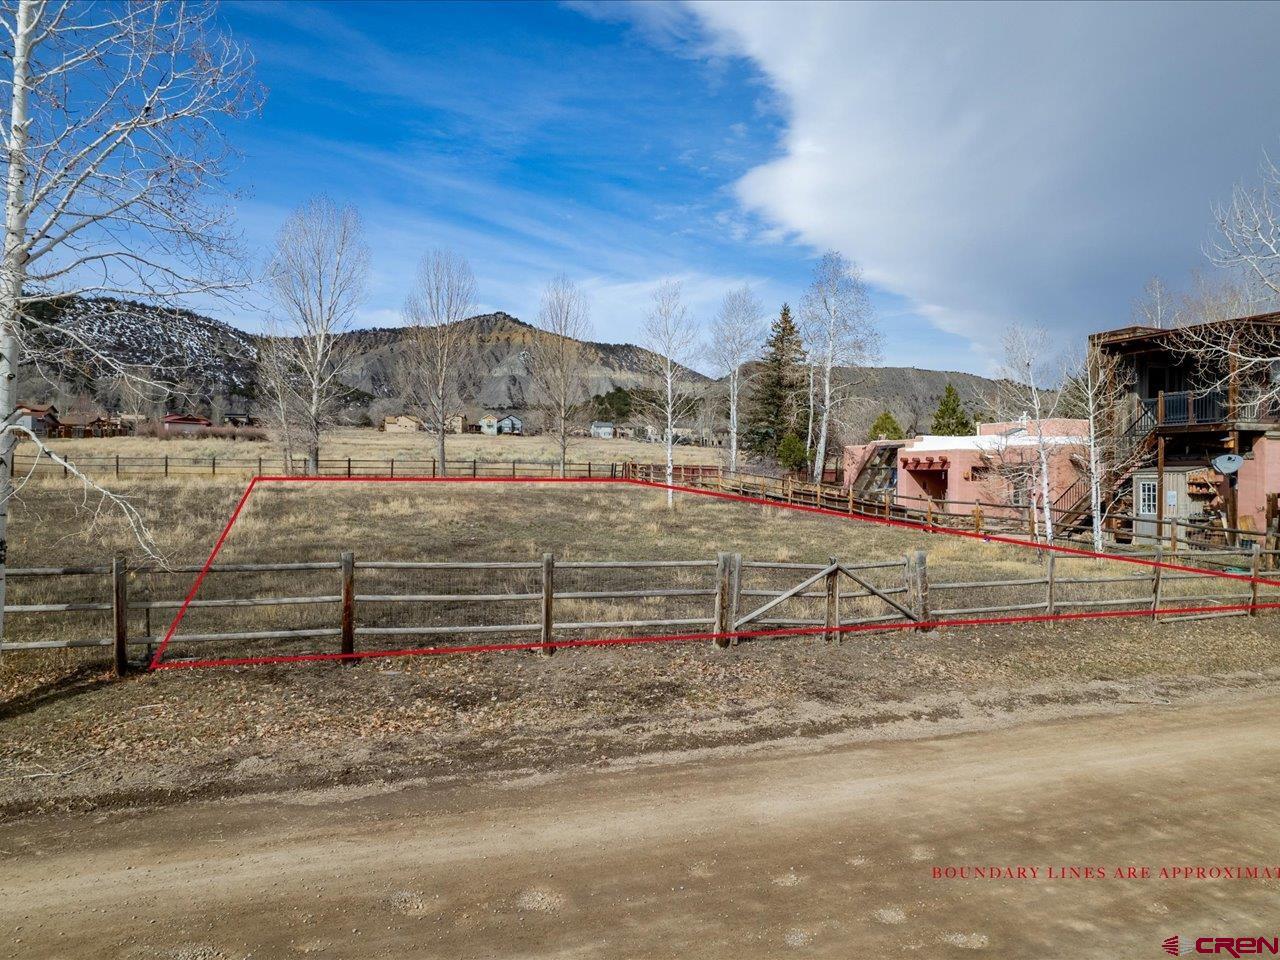 One of the most desirable subdivisions in Ridgway, Solar Ranch is close to downtown Ridgway for easy access shopping, Ridgway Town Park and restaurants. This gorgeous flat lot backs up to open space, walking and biking paths, giving you the mountain setting you are looking for. Make sure and take a look at the pictures for views on the lot, you have views to the south of the San Juan Mountain Range, and views to the east of the Cimarron Range.  Within walking distance of athletic field, this beautiful San Juan mountains surround this lot.   HOA dues are minimal, sewer and water taps available along with natural gas.  It is rare to have a lot available in Solar Ranch.